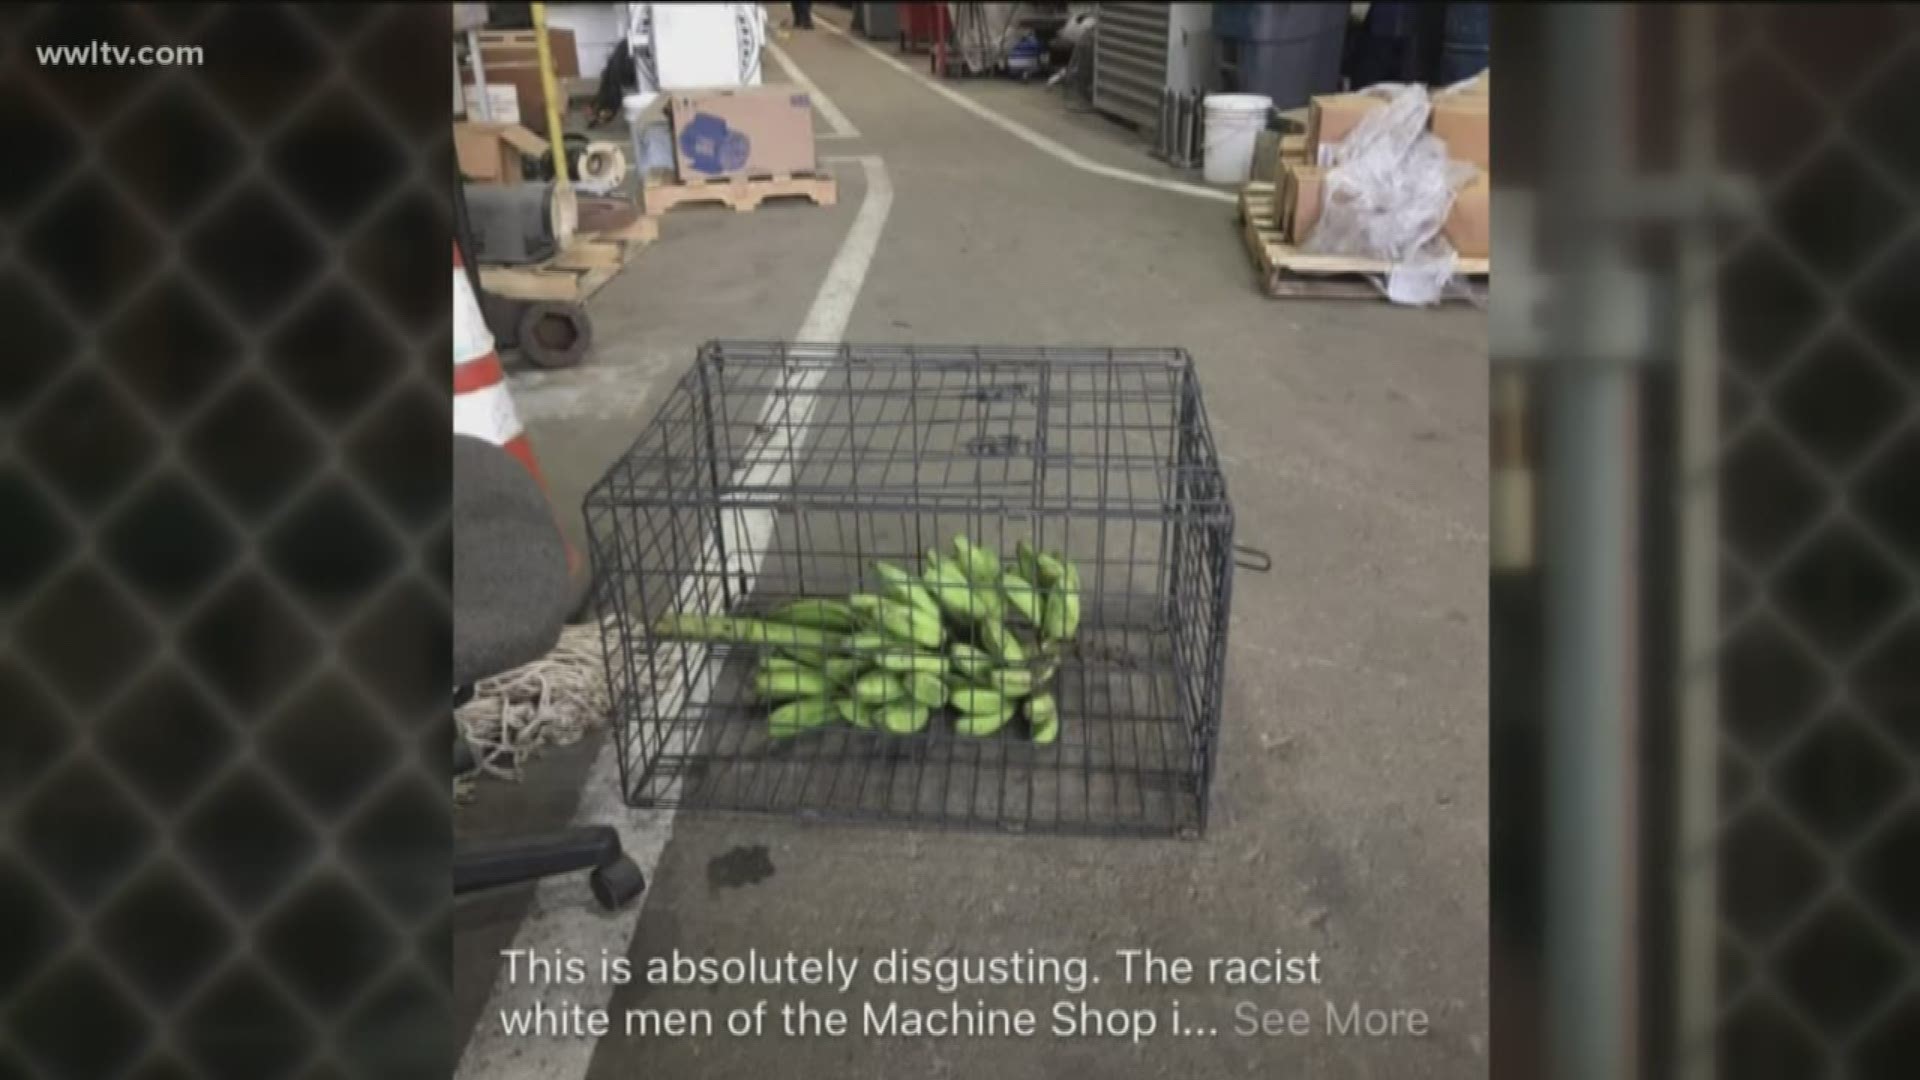 Image showed bananas in cage that were reportedly left for black workers by a white worker